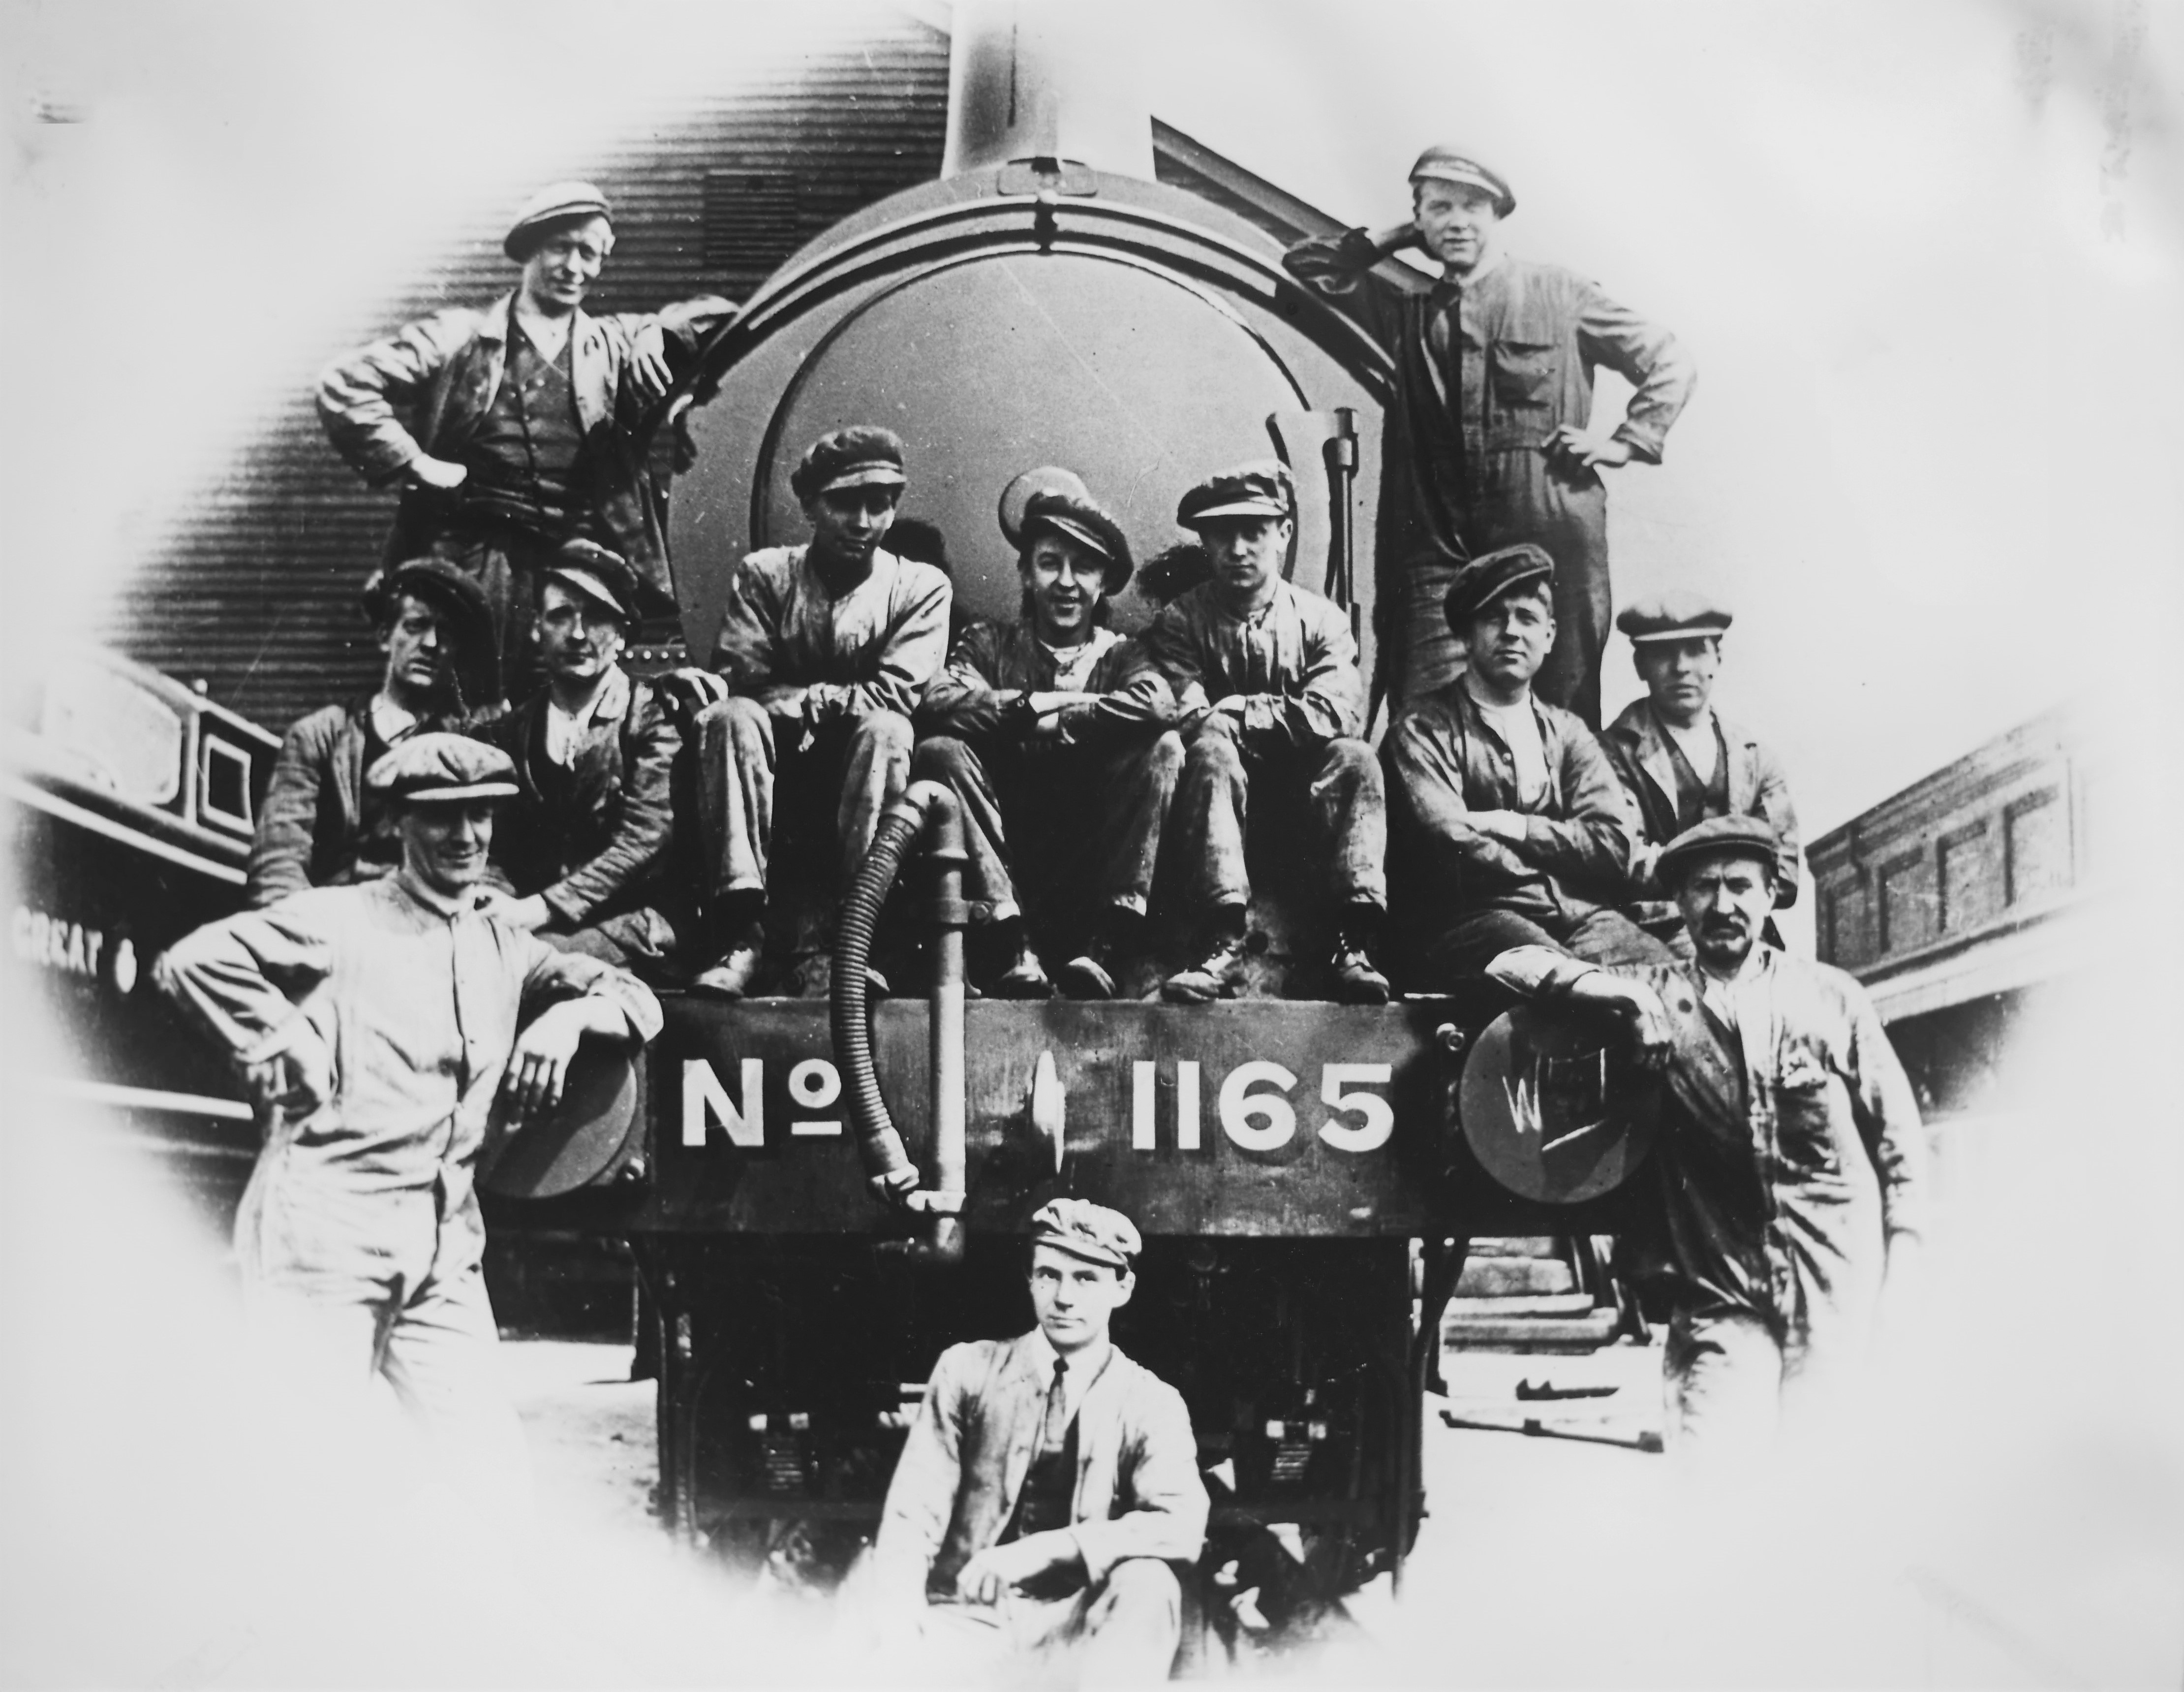 Tuxford Plant workers with Great Central Railways loco no: 1165